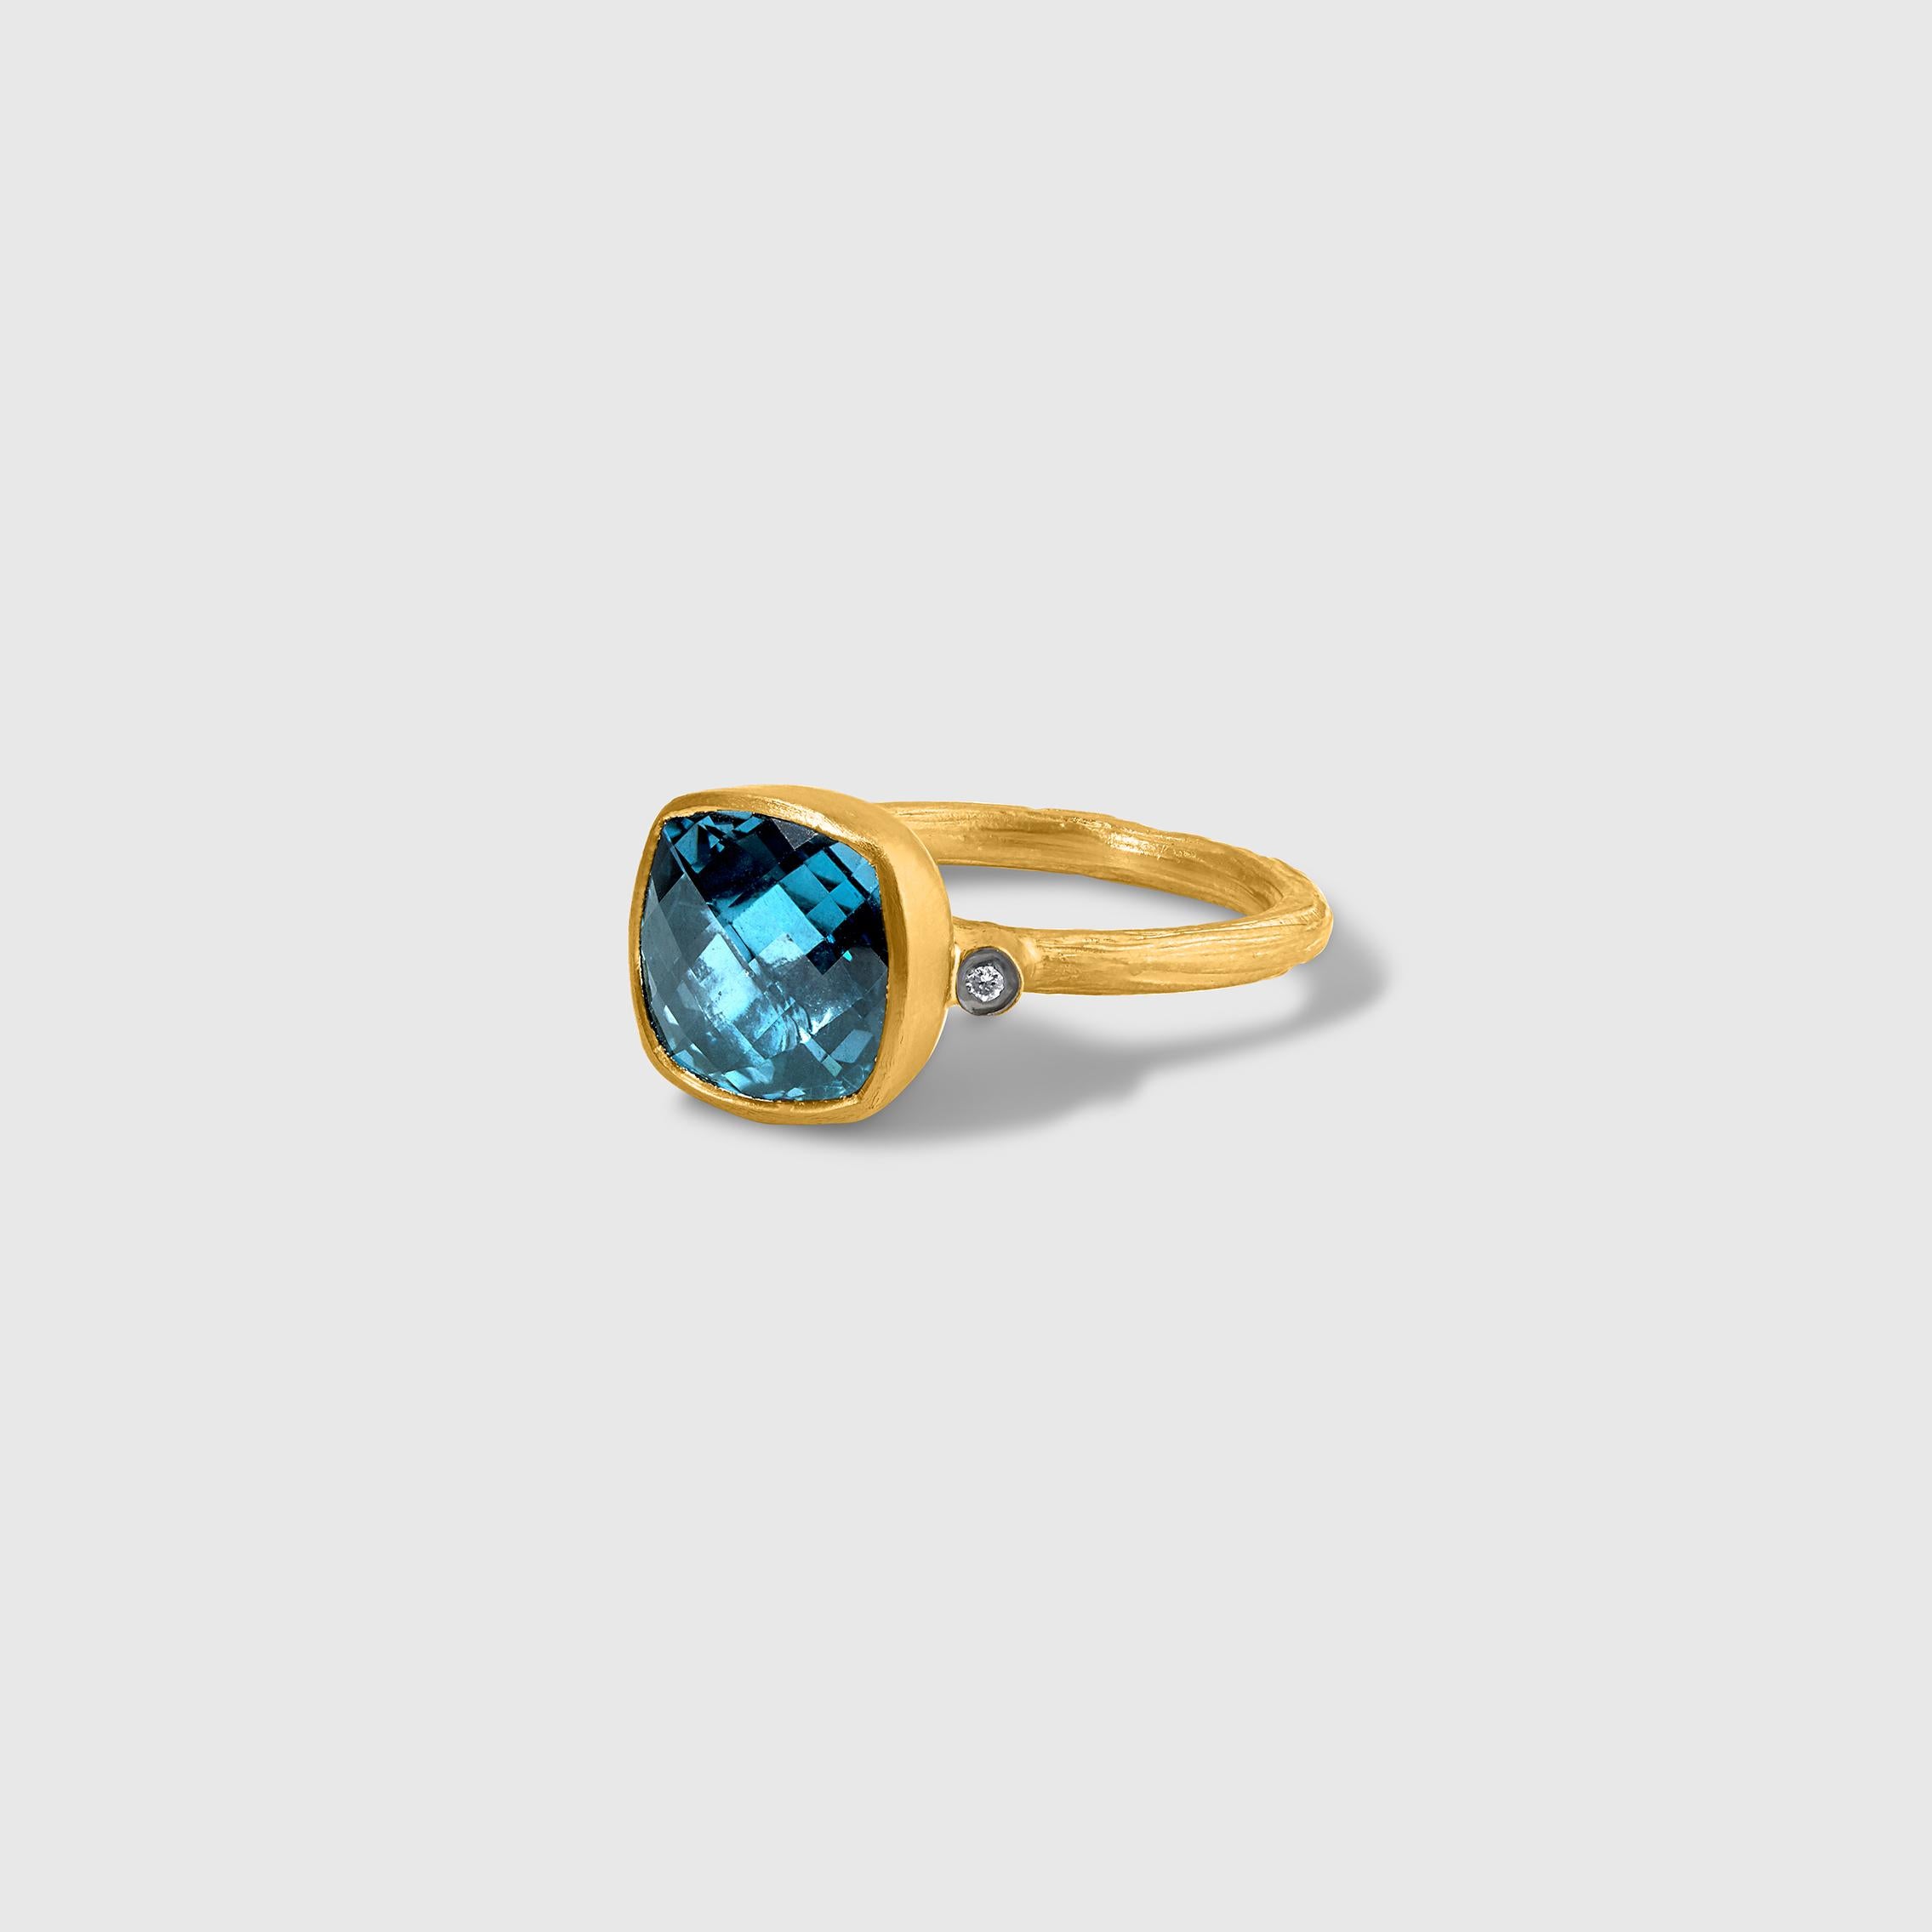 5.74ct Faceted Checkerboard London Blue Topaz and Diamond Ring, 24kt Gold and Silver, Ring details: Size 7 in stock. Diamonds: 0.02ct, Colour: H Clarity: VS2

Made to order sizes take approximately 4-6 weeks.

About Kurtulan:
Kurtulan jewellery